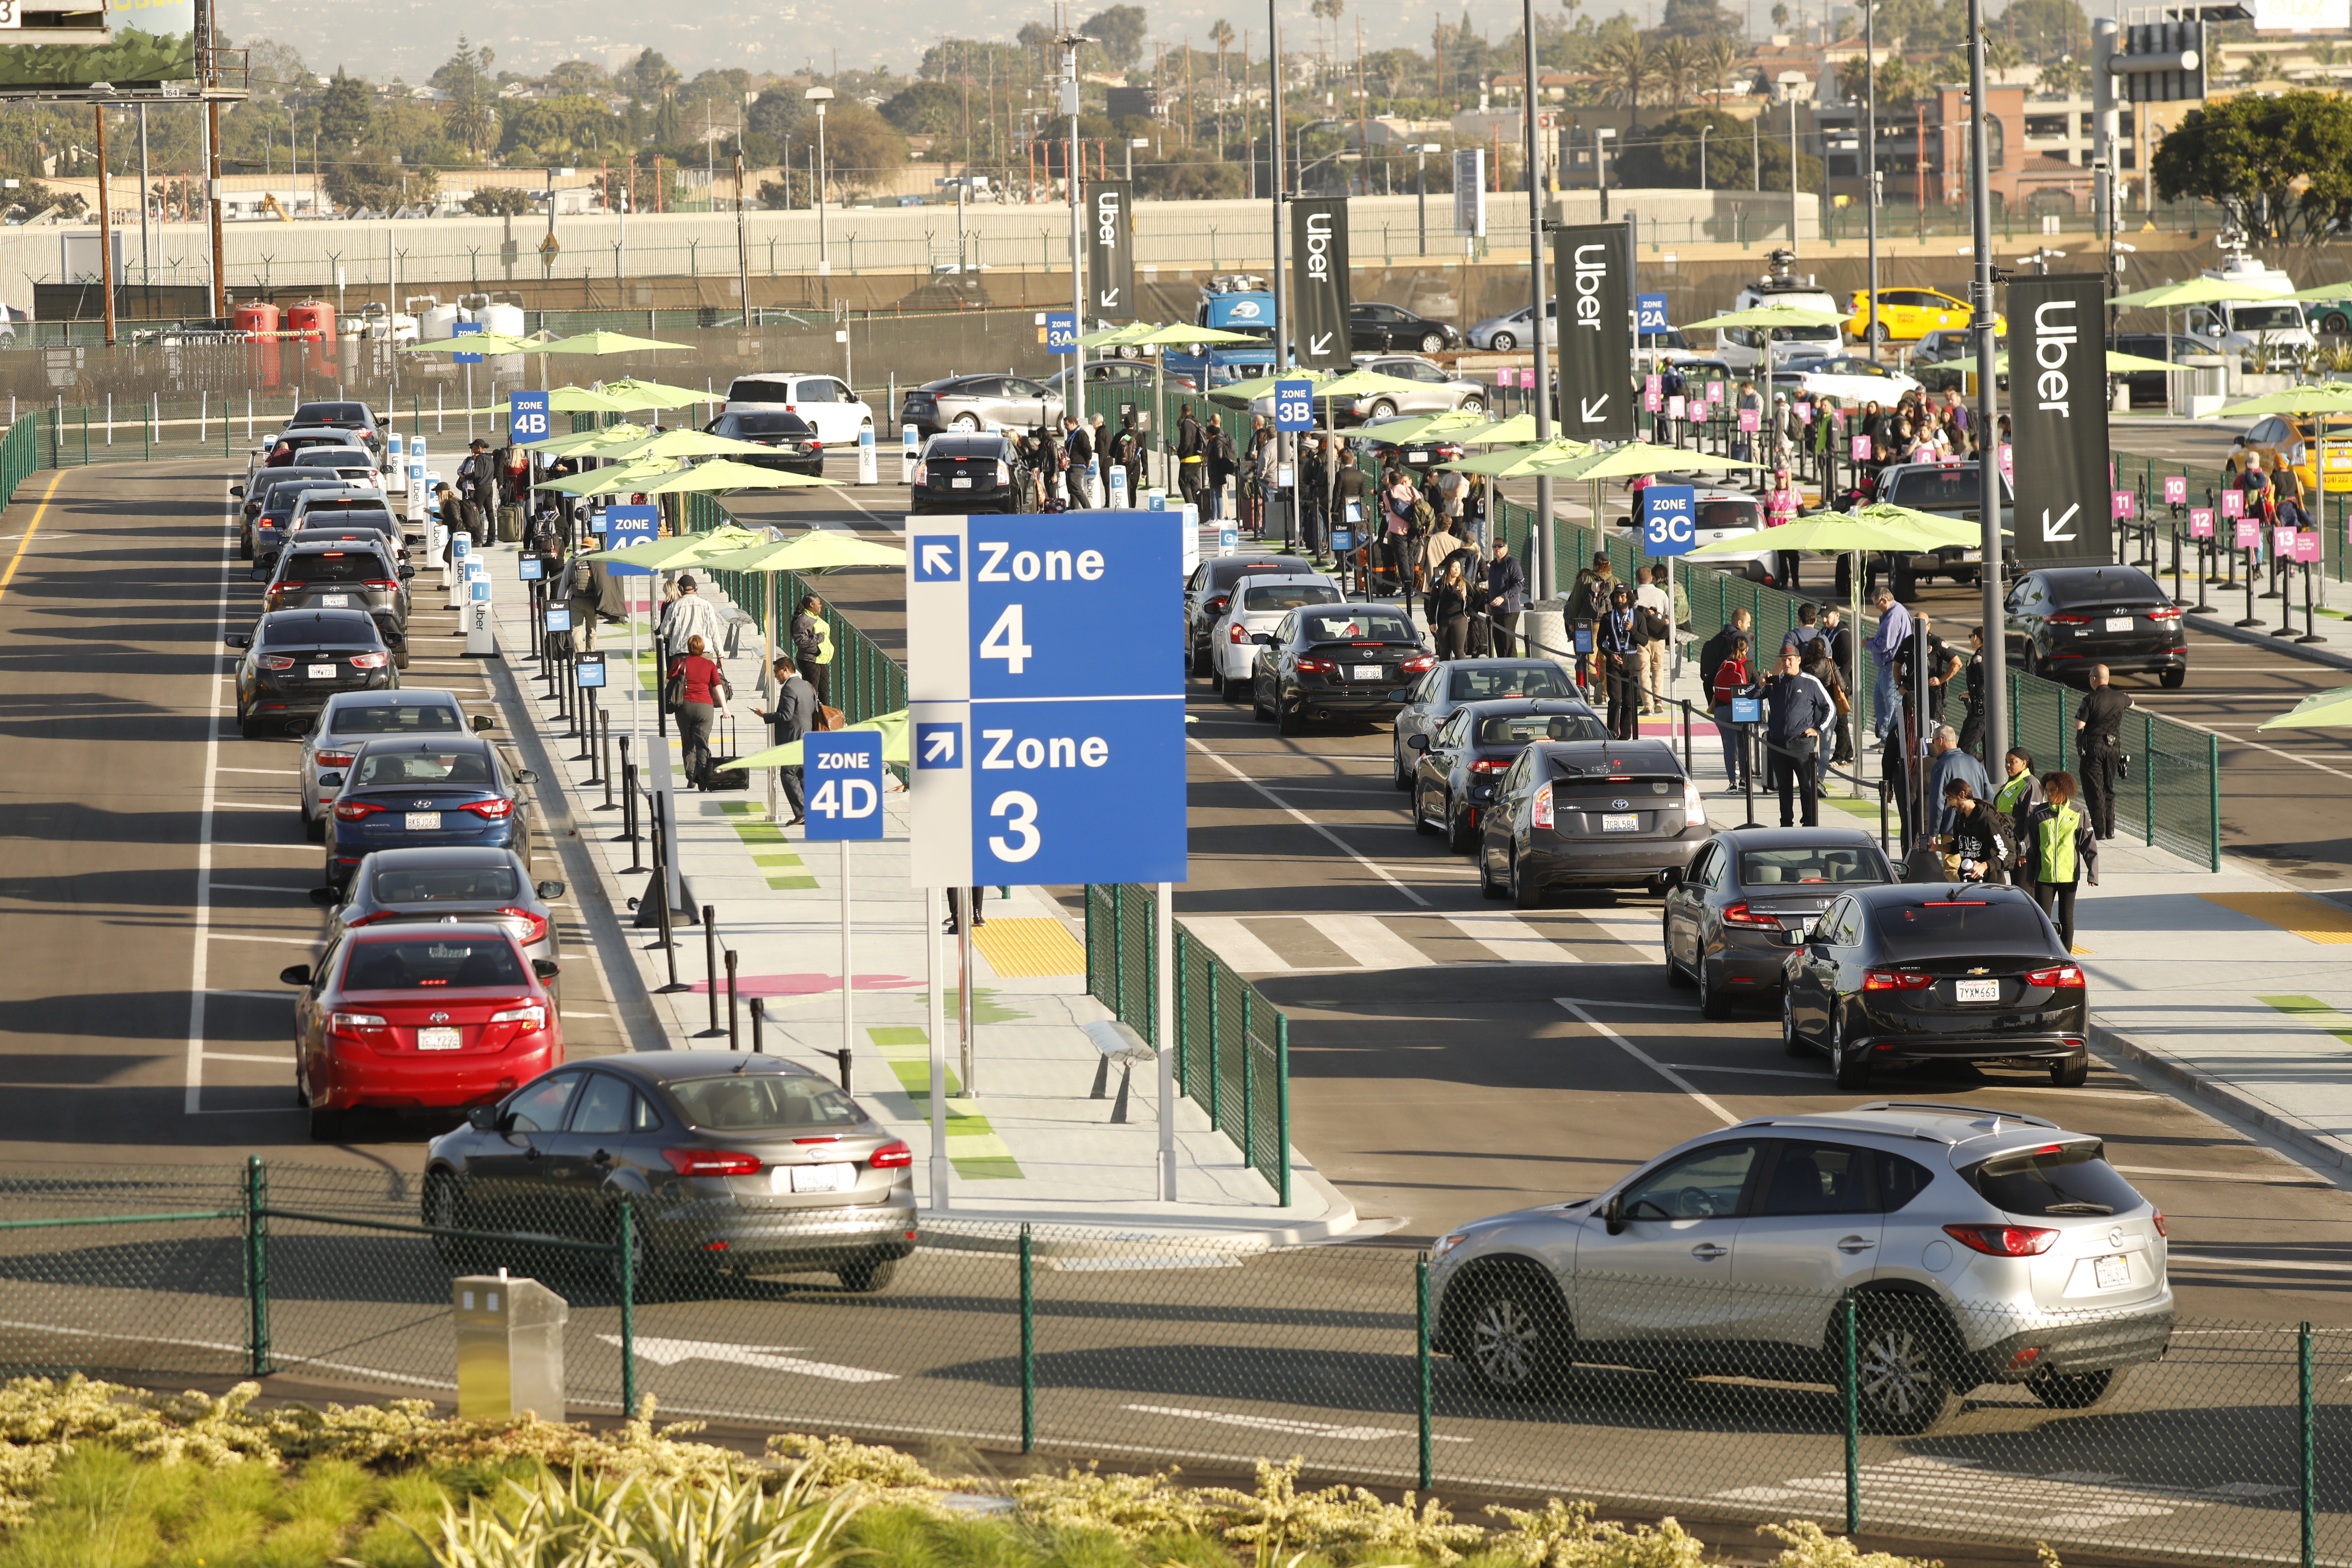 Rows of cars are lined up at an airport pickup parking lot with people holding luggage standing in long lines to access them. Signs that say Uber are seen in the background.